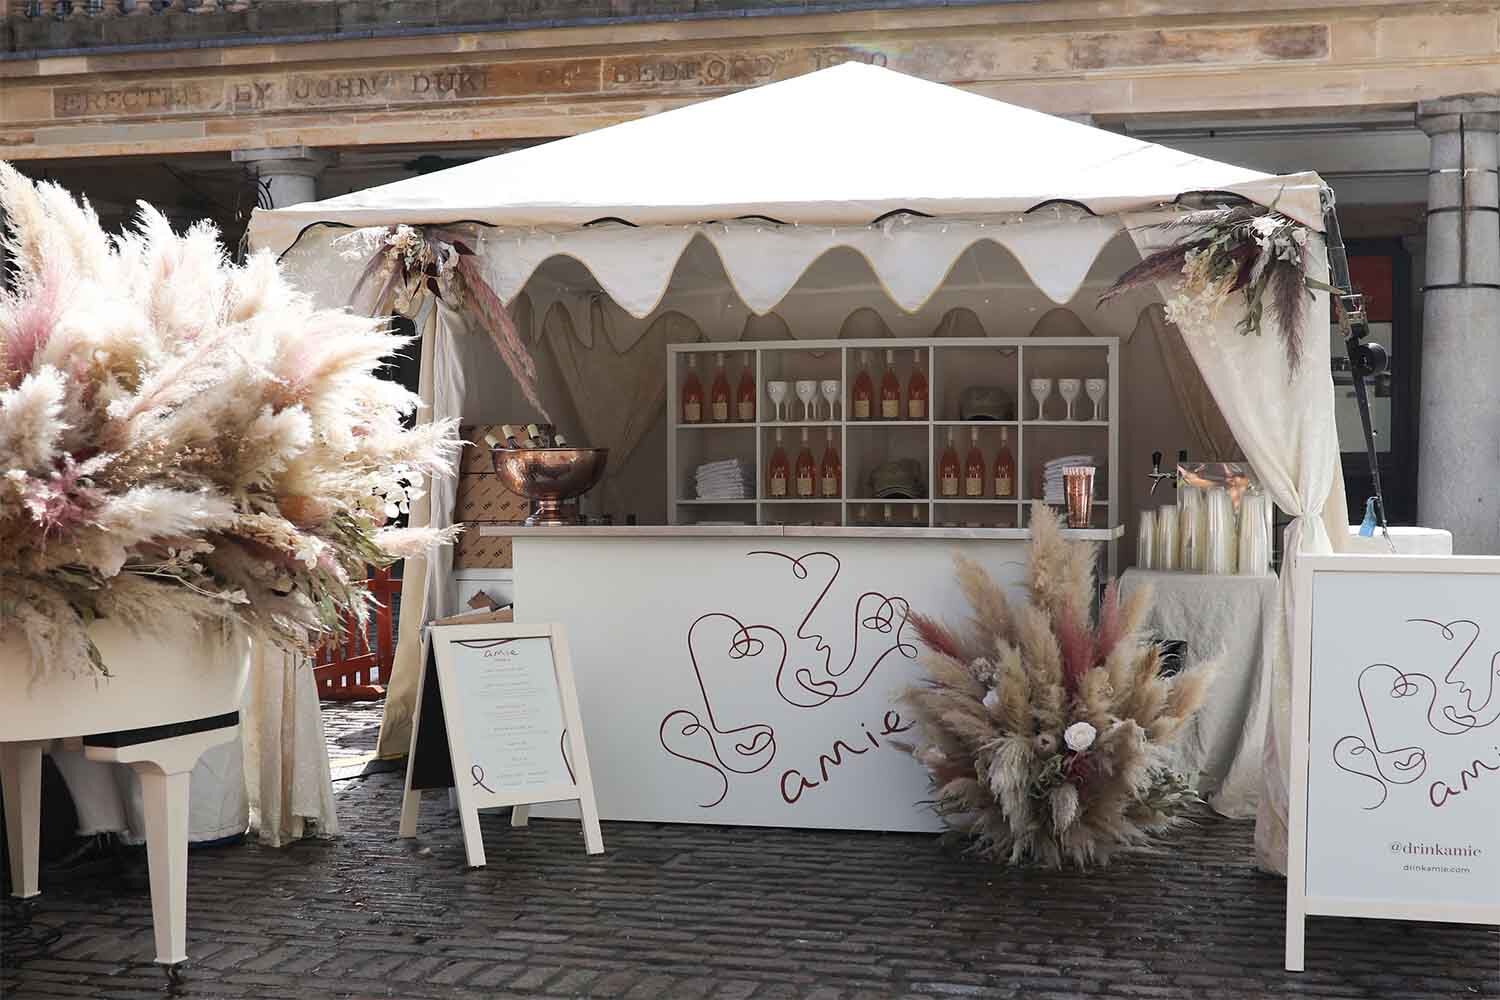 Pop Up Bars for Weddings by Portabar